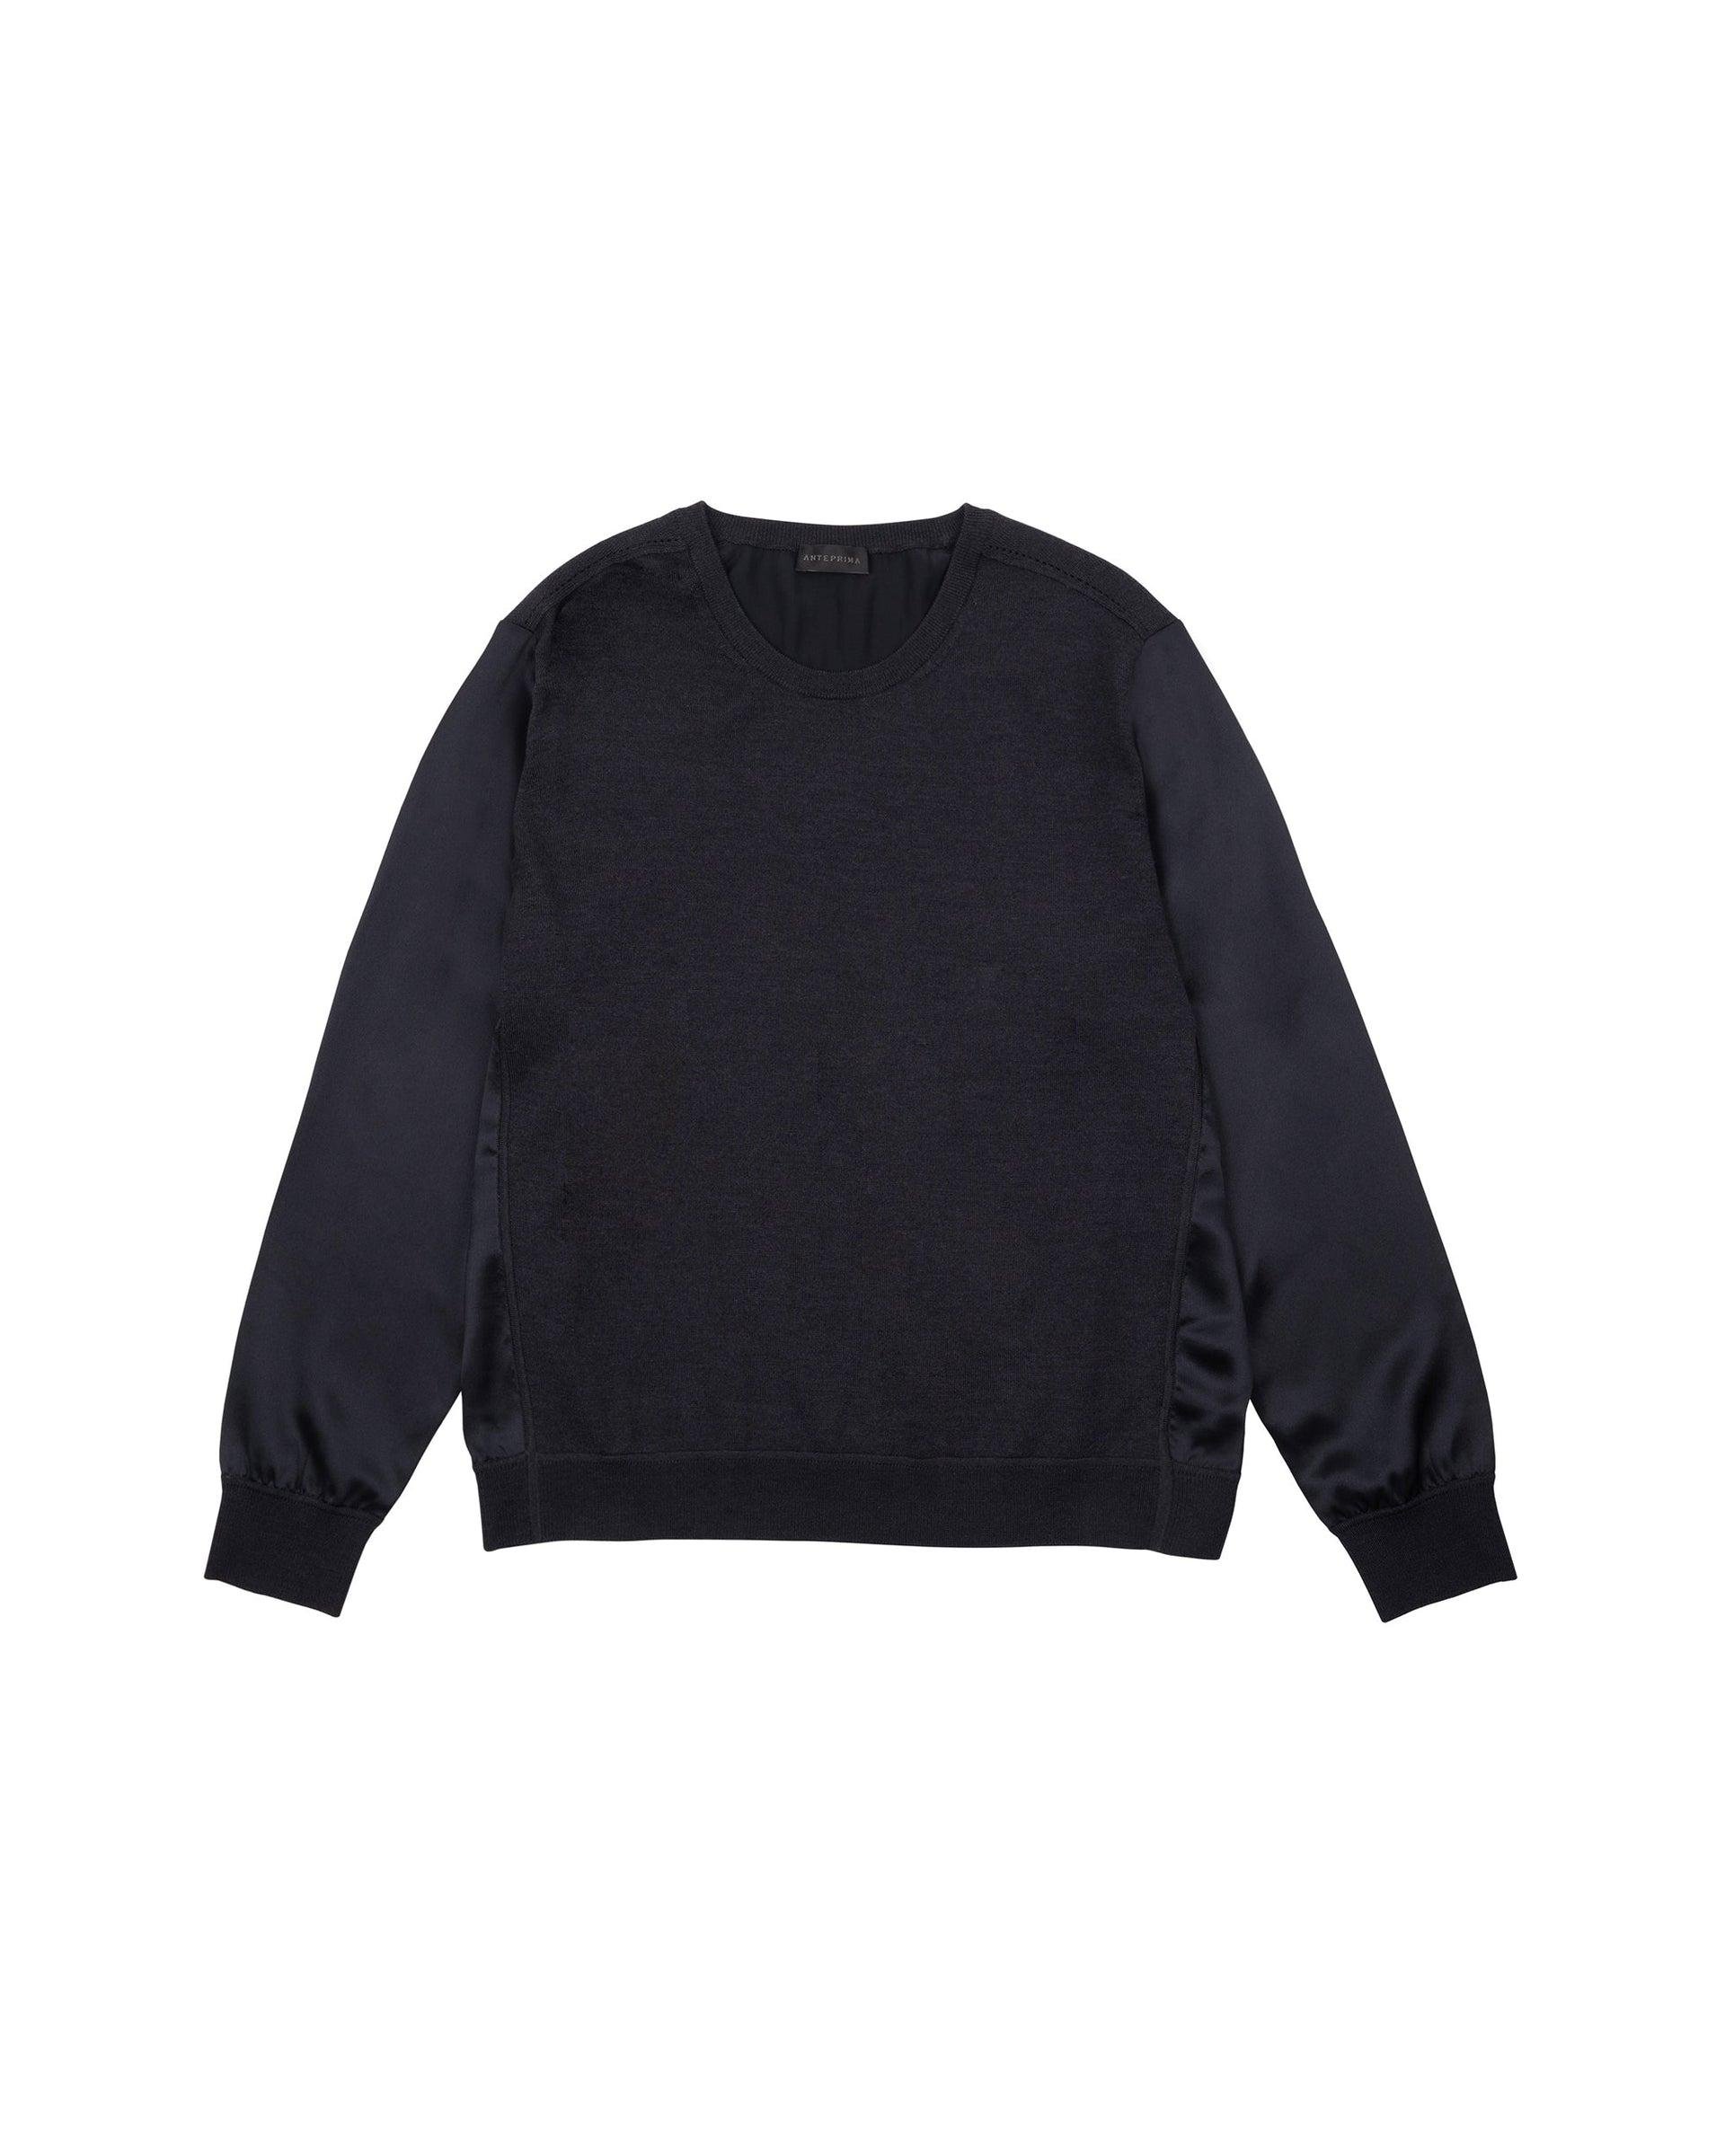 Luxe Ponte Sweater by ANTEPRIMA